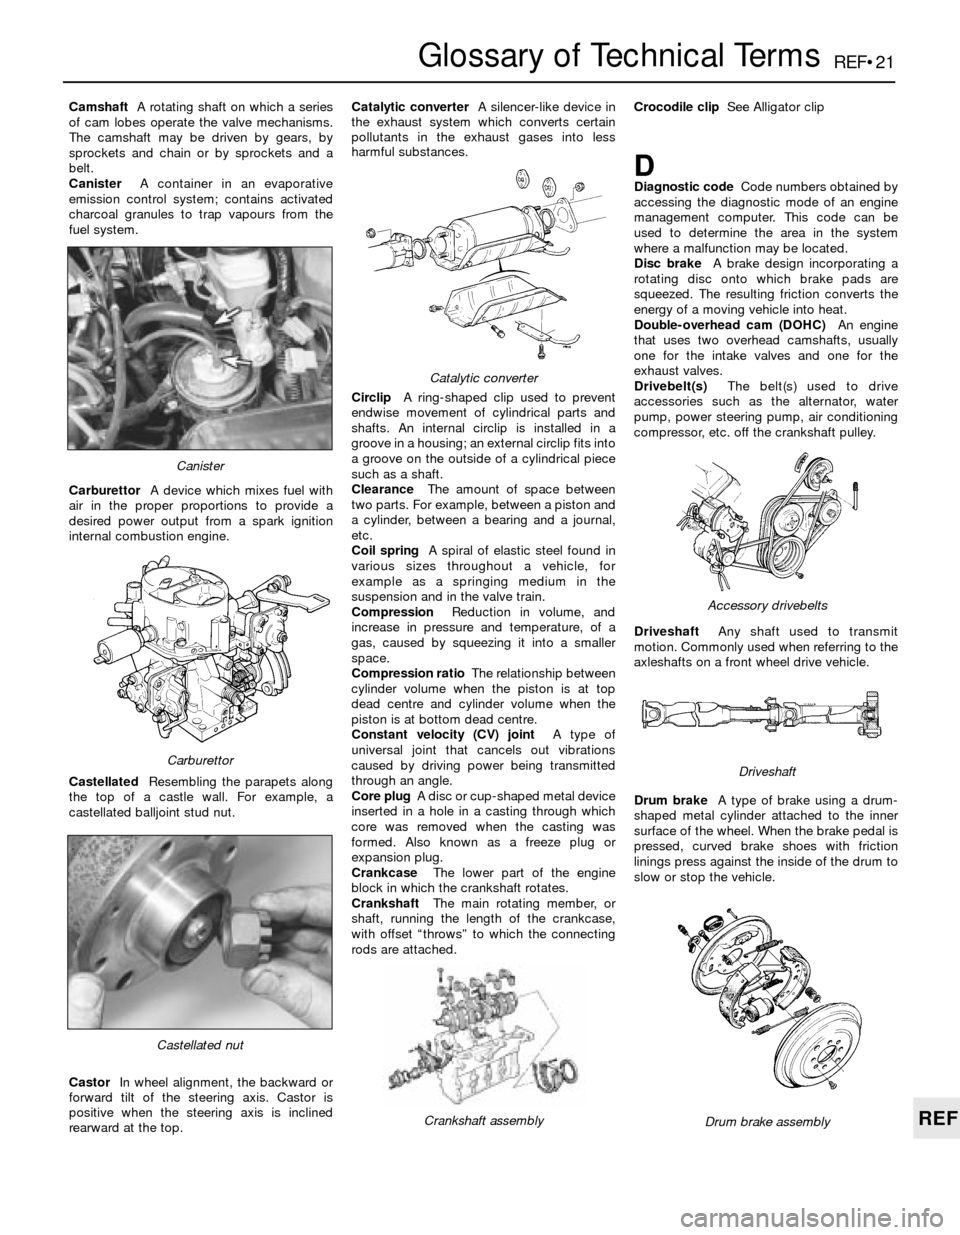 BMW 5 SERIES 1989 E34 Service Manual REF•21
REF
Glossary of Technical Terms
CamshaftA rotating shaft on which a series
of cam lobes operate the valve mechanisms.
The camshaft may be driven by gears, by
sprockets and chain or by sprocke